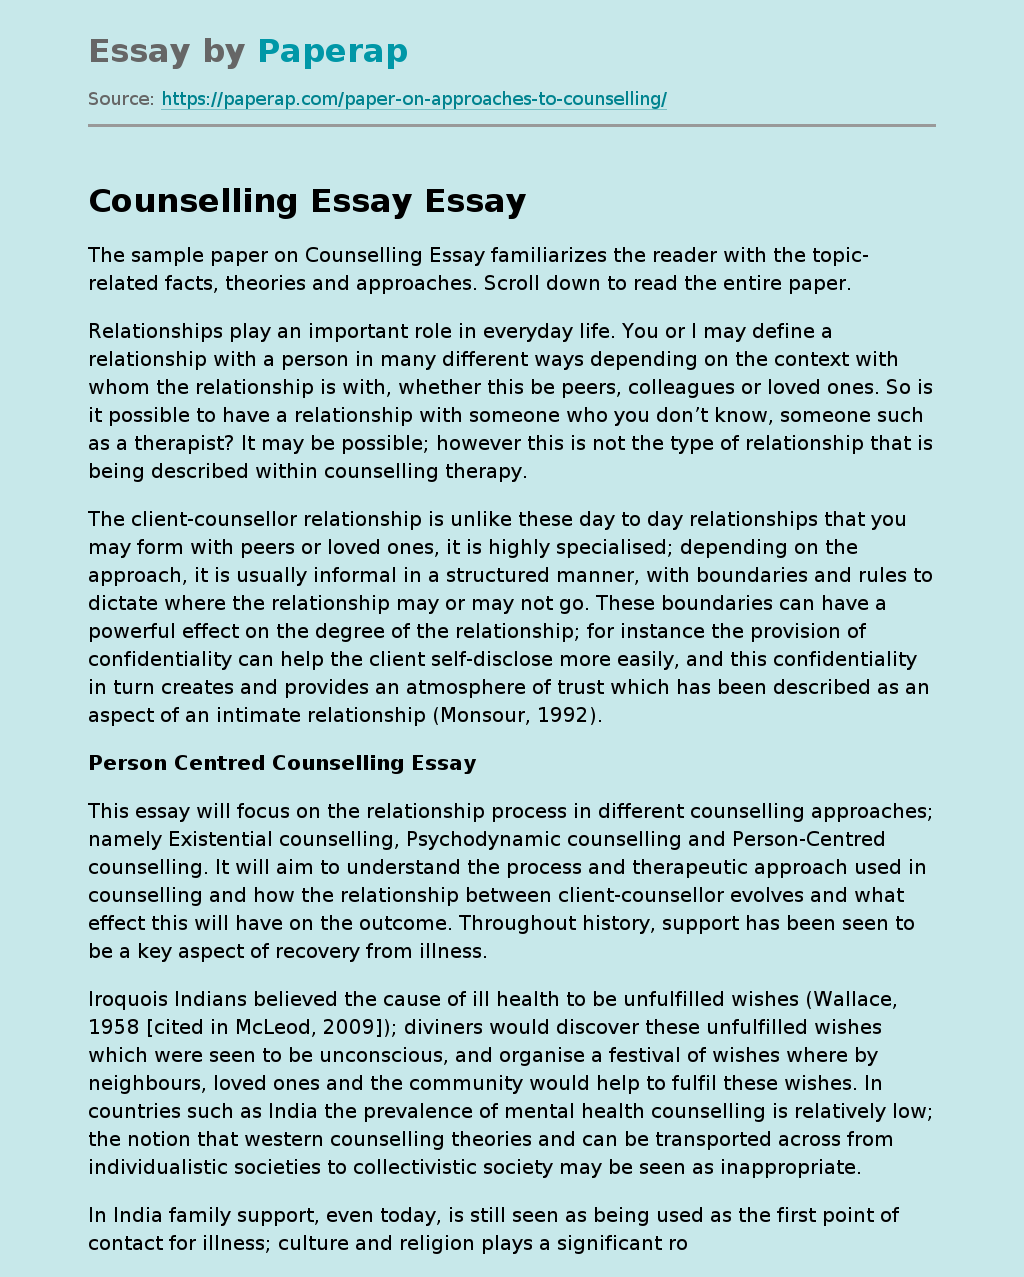 Person Centred Counselling Essay